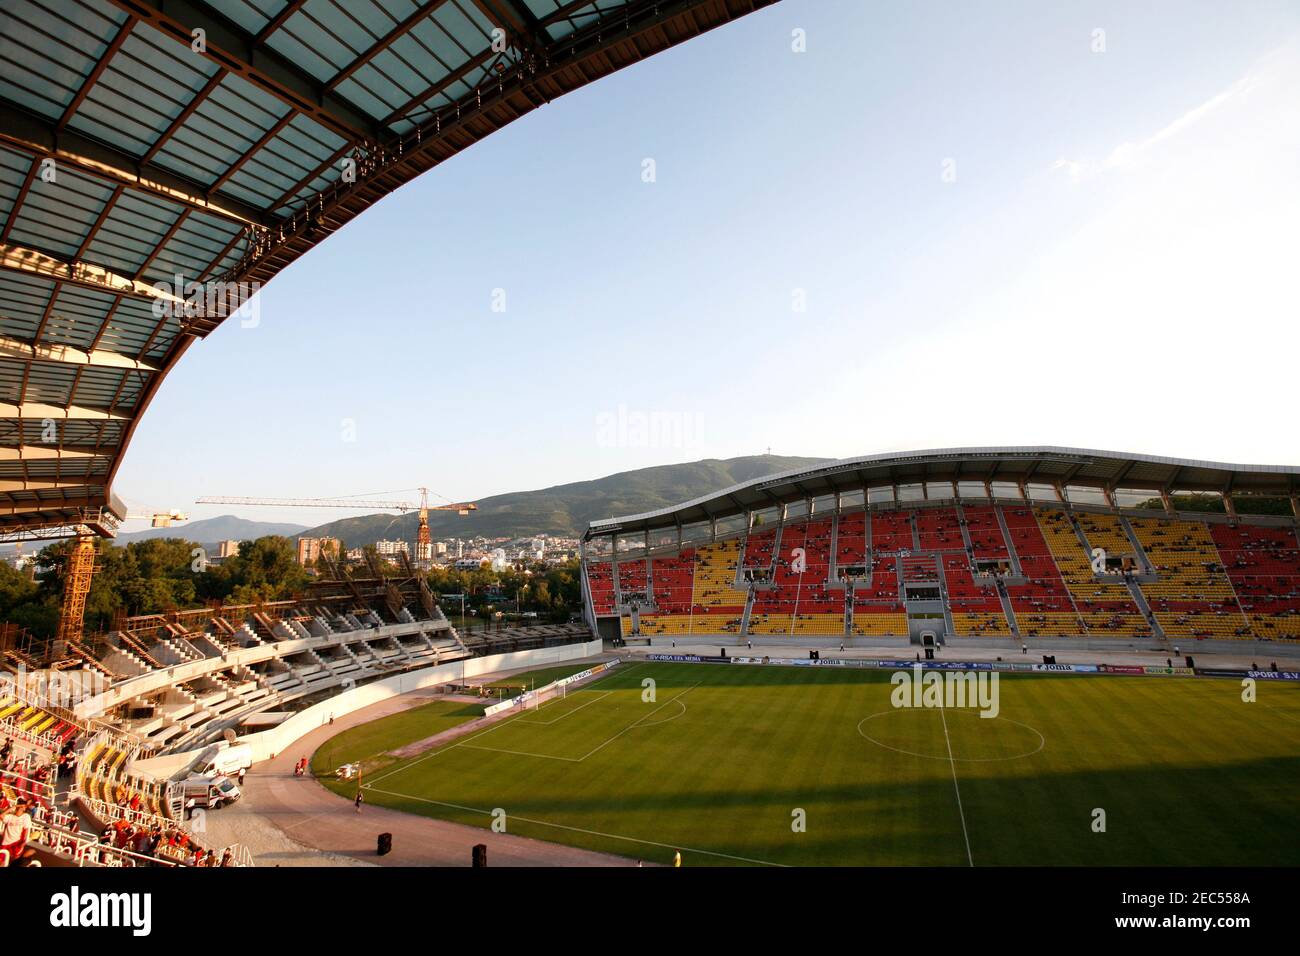 A general view of the Philip II Arena before the UEFA Super Cup Final match  at the Philip II Arena, Skopje, Macedonia Stock Photo - Alamy